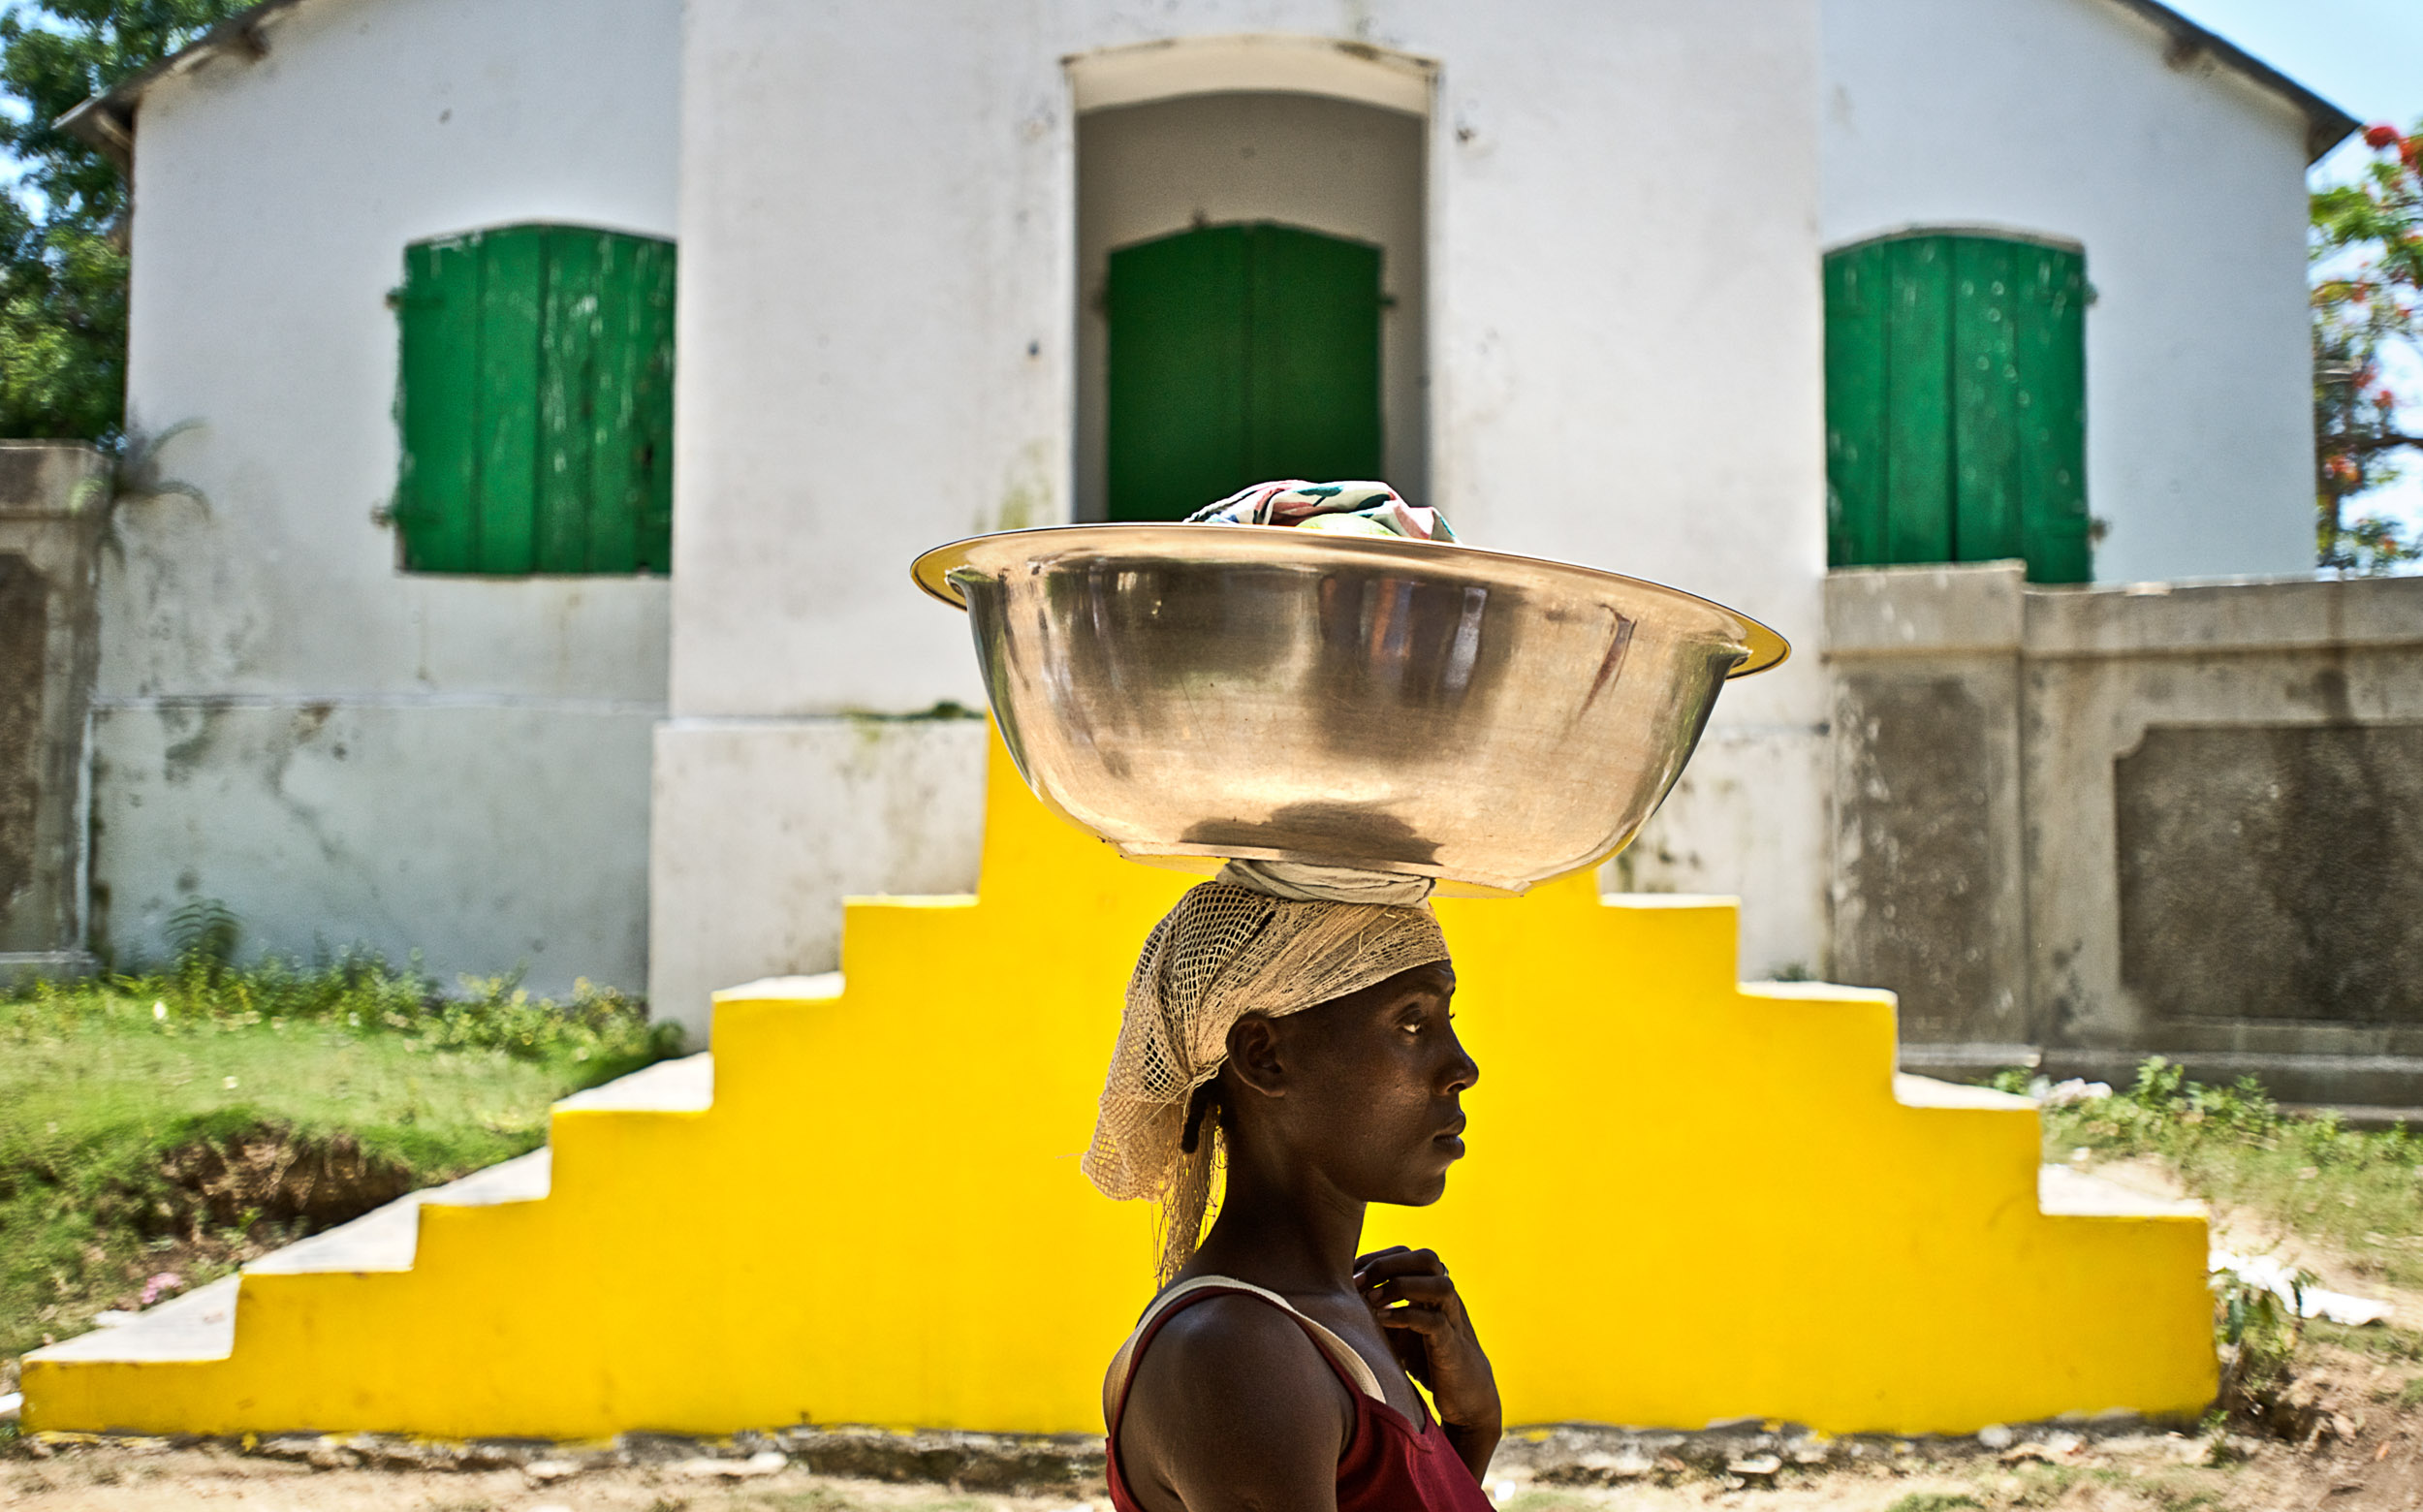 A woman walks past yellow stairs with a bowl on her head in Ville Bonheur, Haiti.